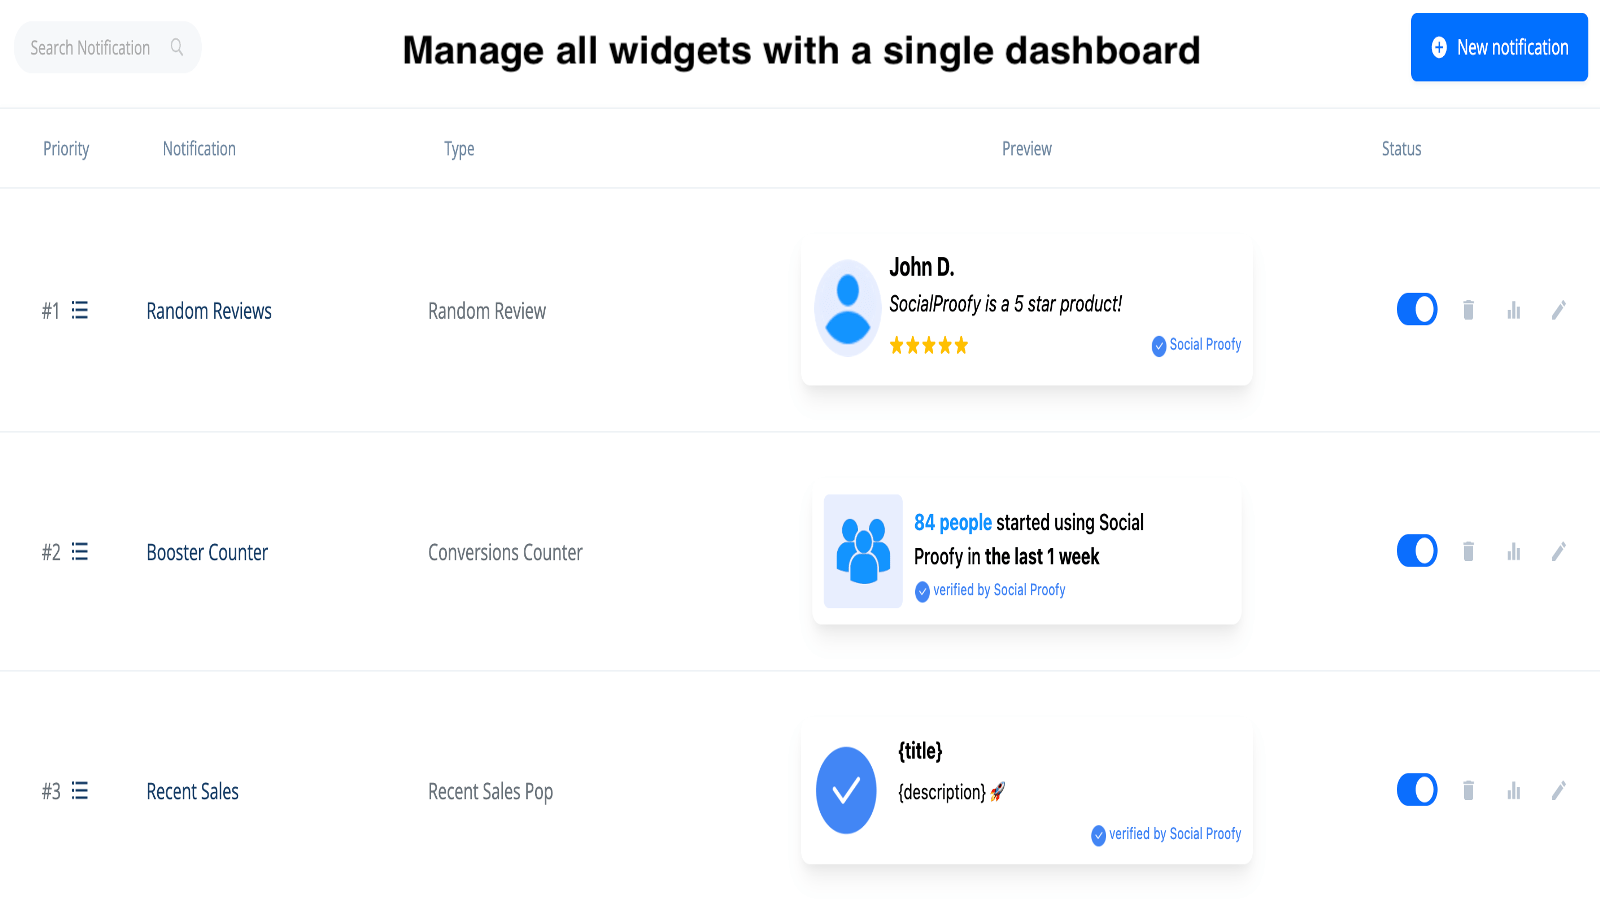 Manage all widgets with a single dashboard